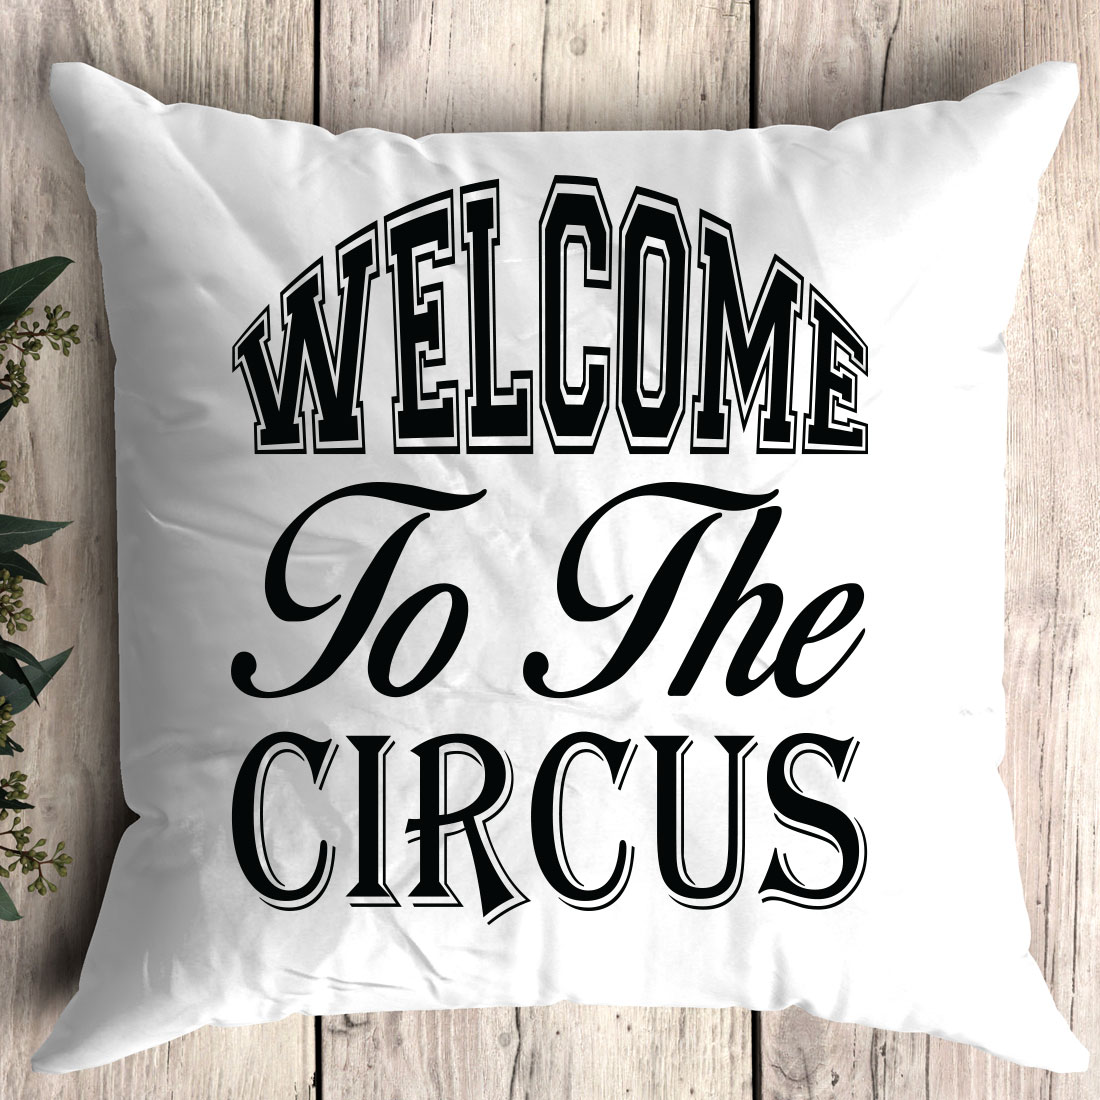 Pillow that says welcome to the circus.